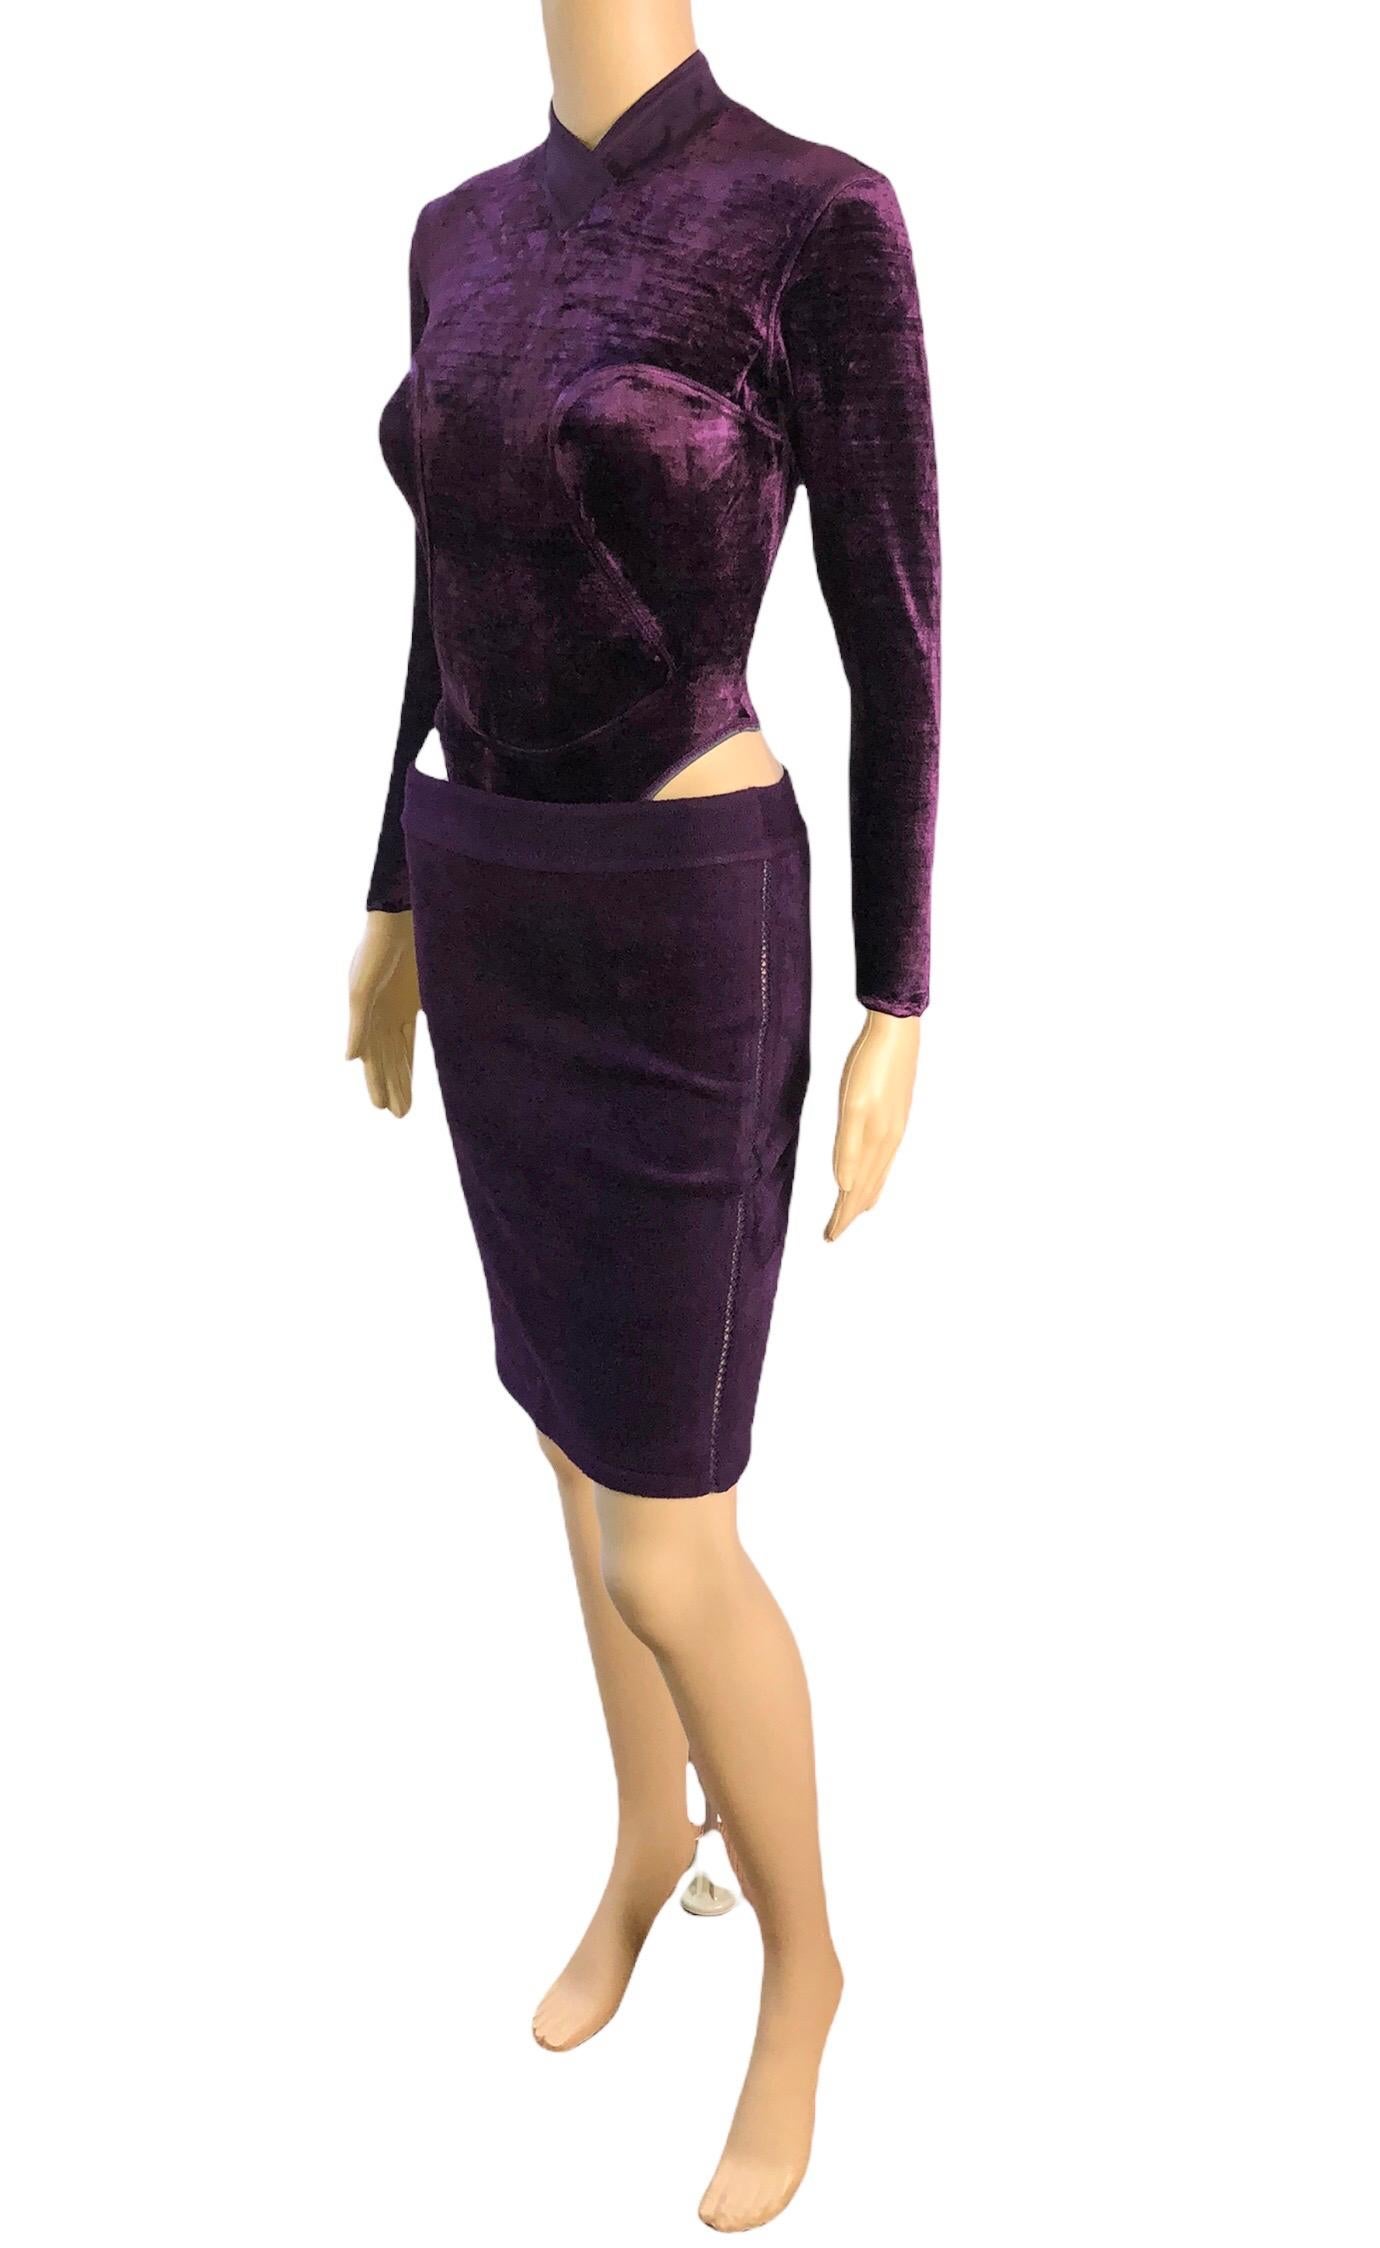 Azzedine Alaia F/W 1991 Vintage Chenille Bodycon Purple Skirt and Bodysuit Top 2 Piece Set Size S/M

Please note the skirt is size S and the top is size M.
